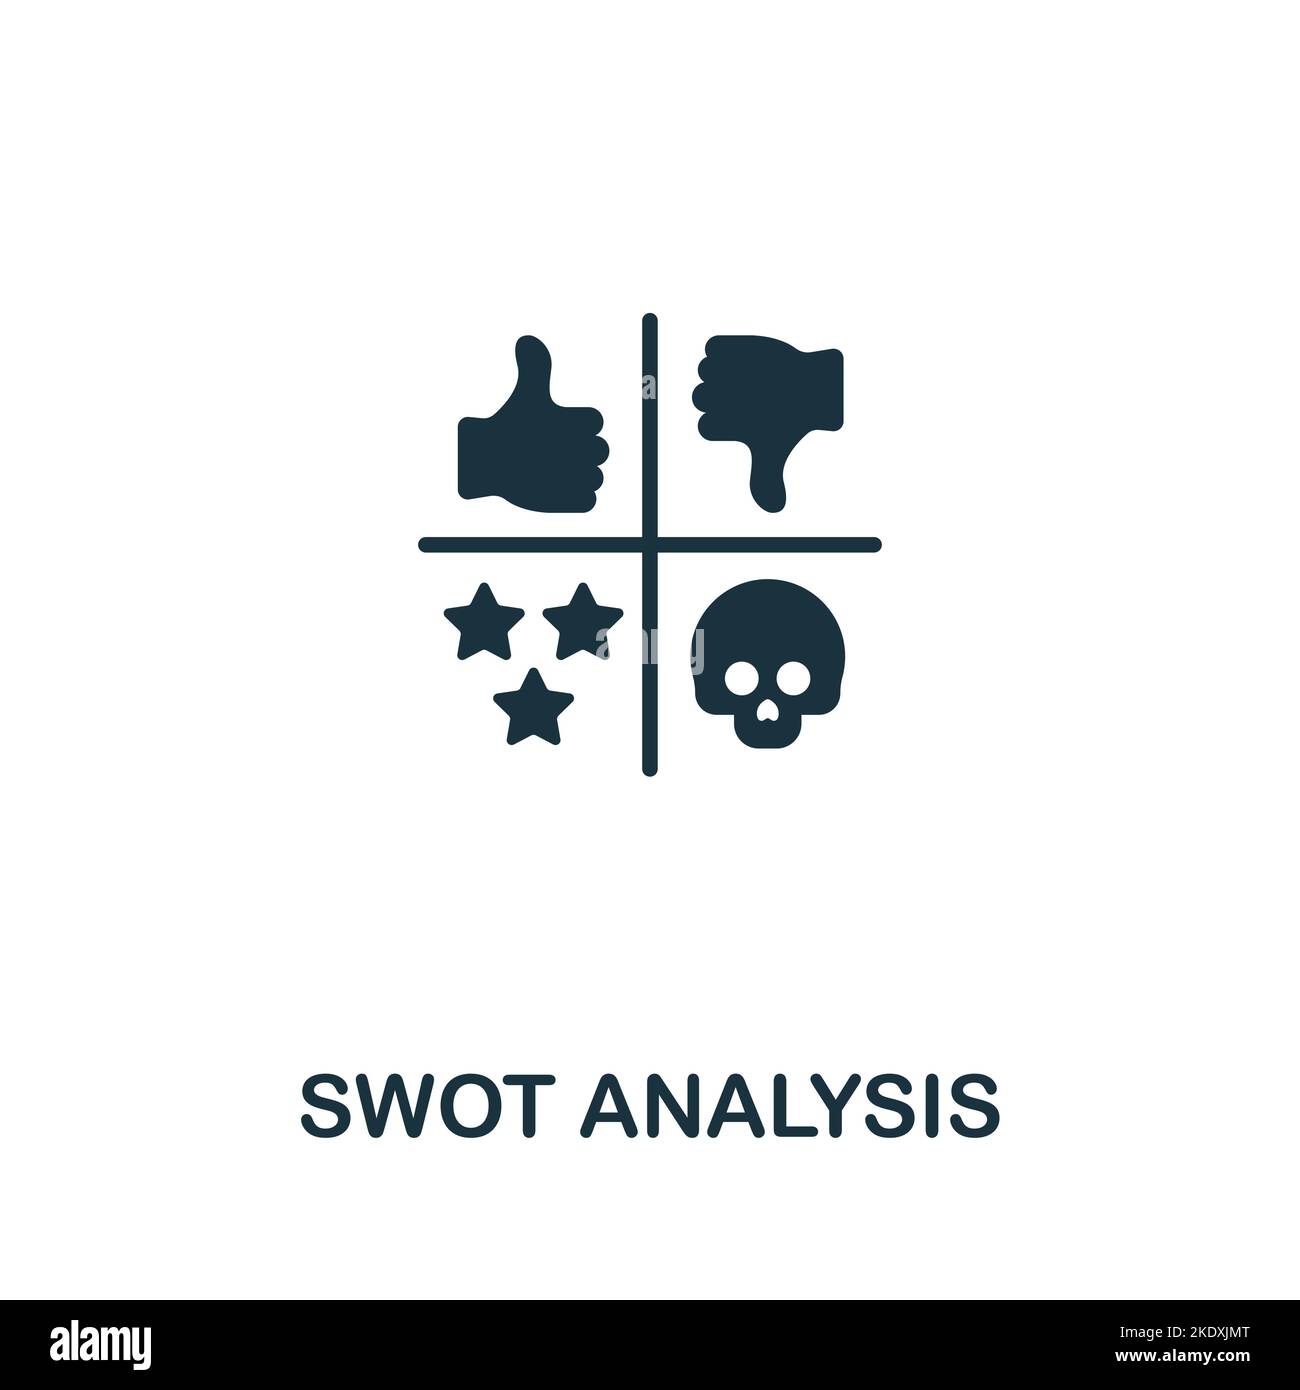 Swot Analysis icon. Monochrome simple Global Business icon for templates, web design and infographics Stock Vector